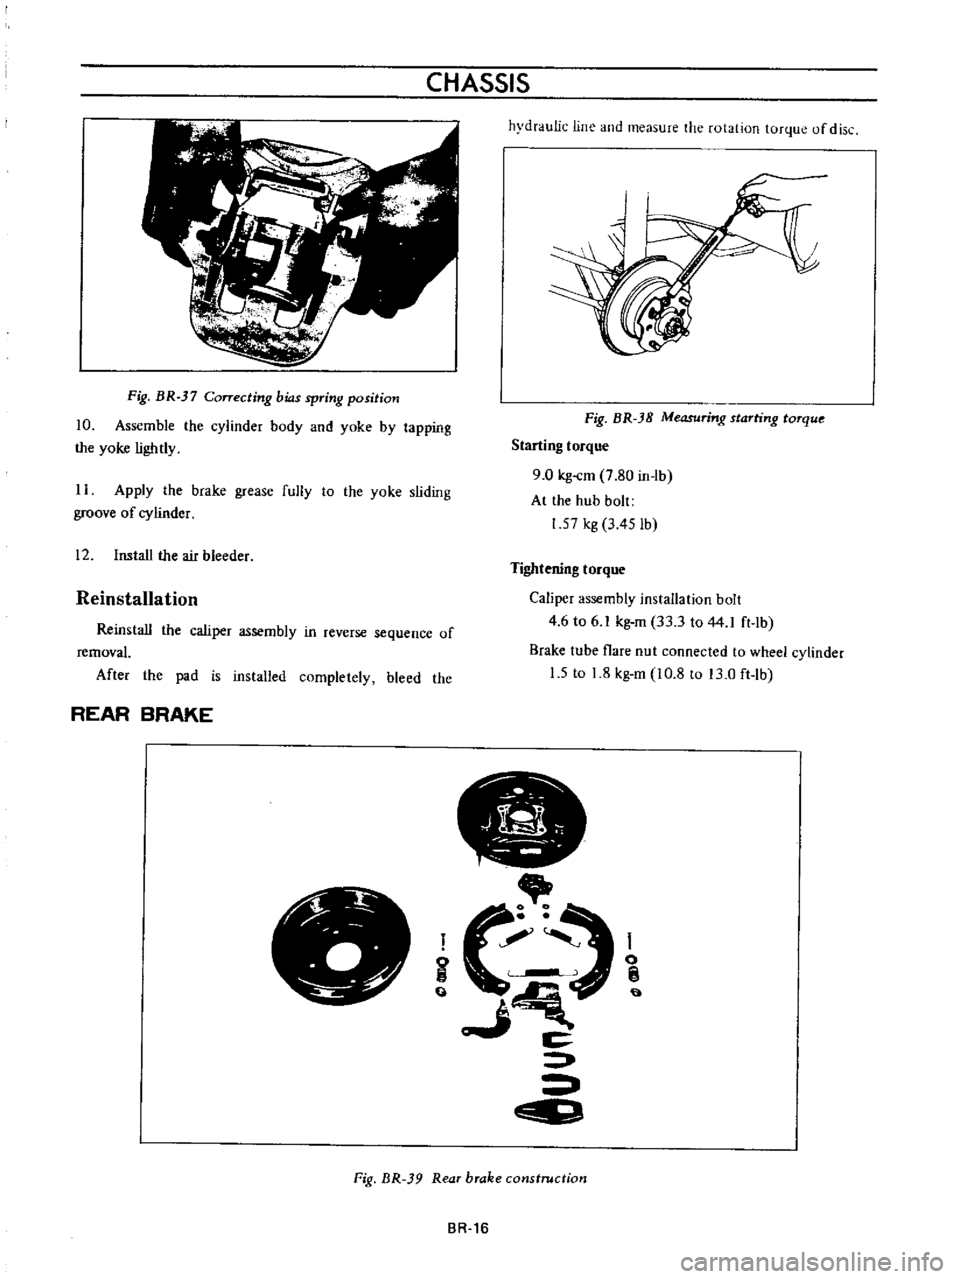 DATSUN B110 1973  Service Repair Manual 
CHASSIS

Fig 
BR 
37

Correcting 
bias

spring 
position

10

Assemble

the

cylinder 
body 
and

yoke 
by

tapping

the

yoke 
lightly

11

Apply 
the 
brake

grease 
fully 
to

the

yoke 
sliding

